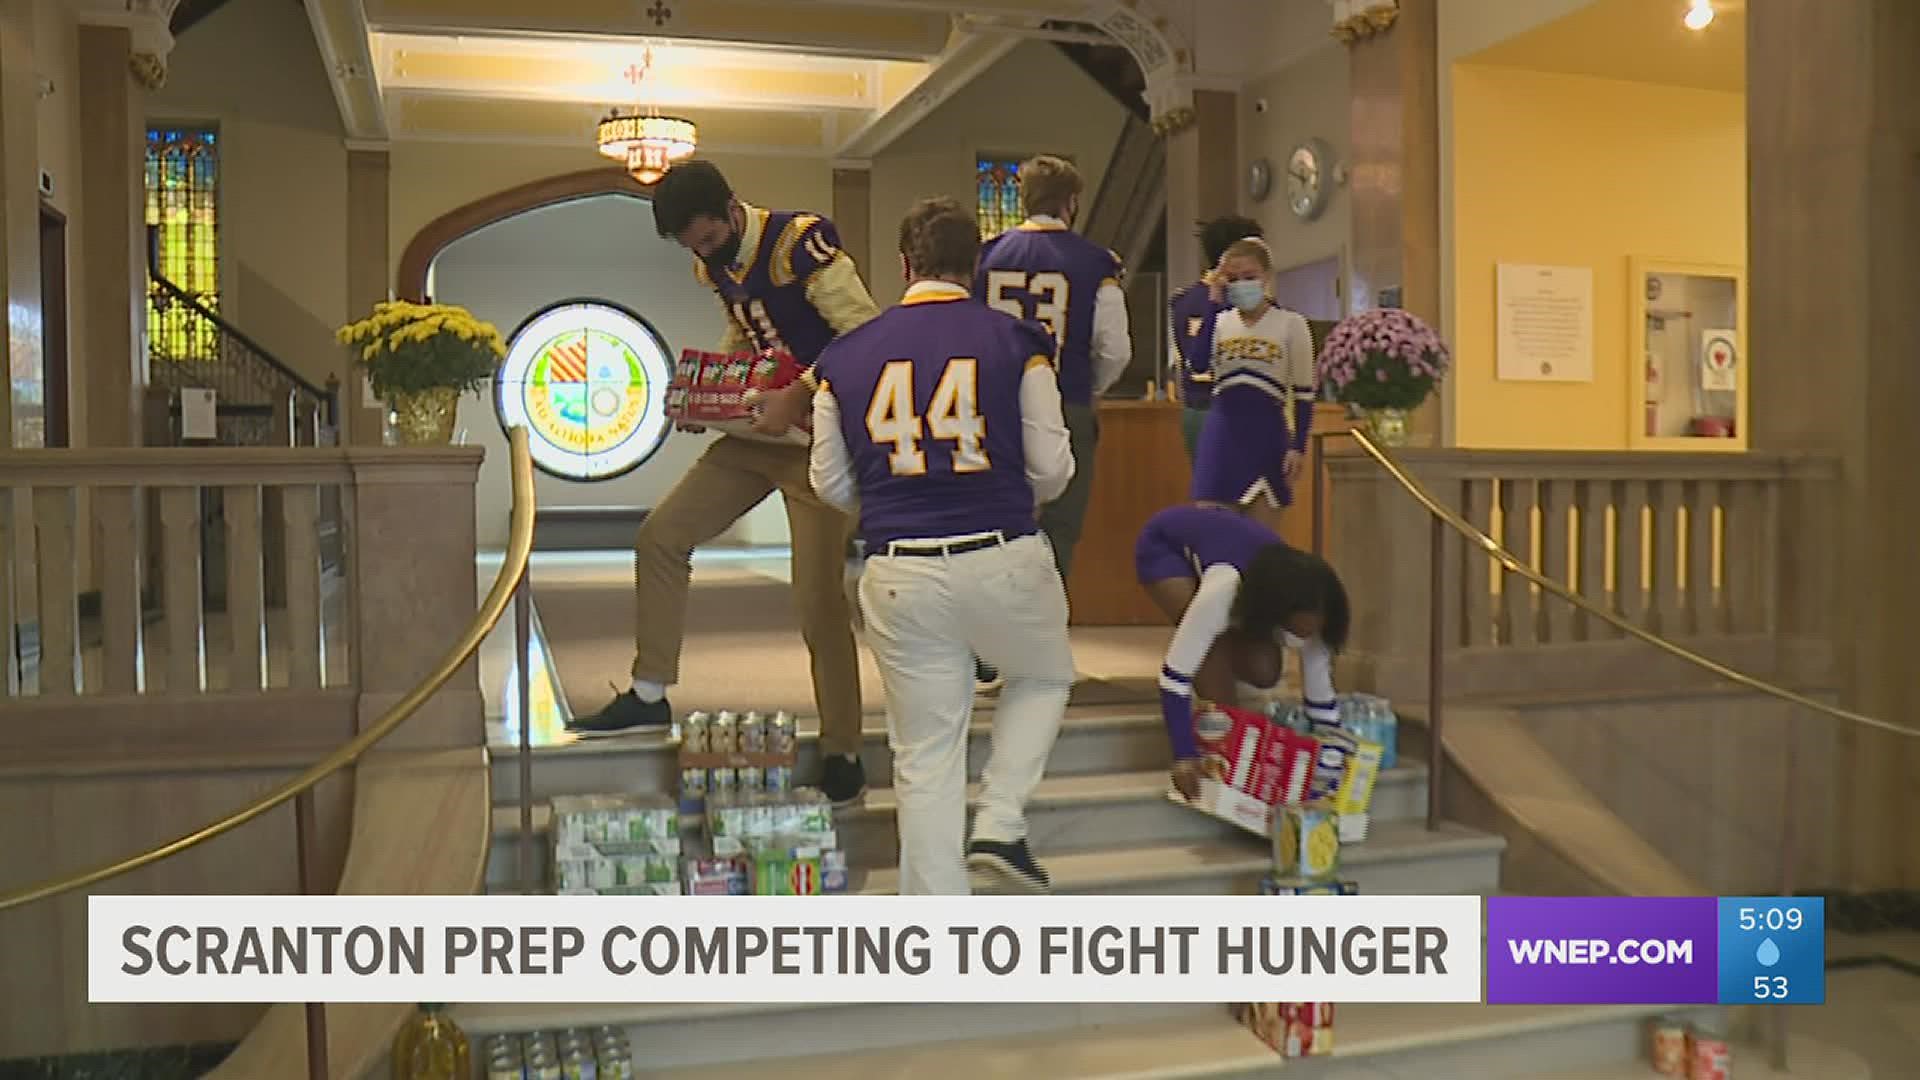 Students at Scranton Prep are competing against 14 other schools in a food drive to combat hunger.